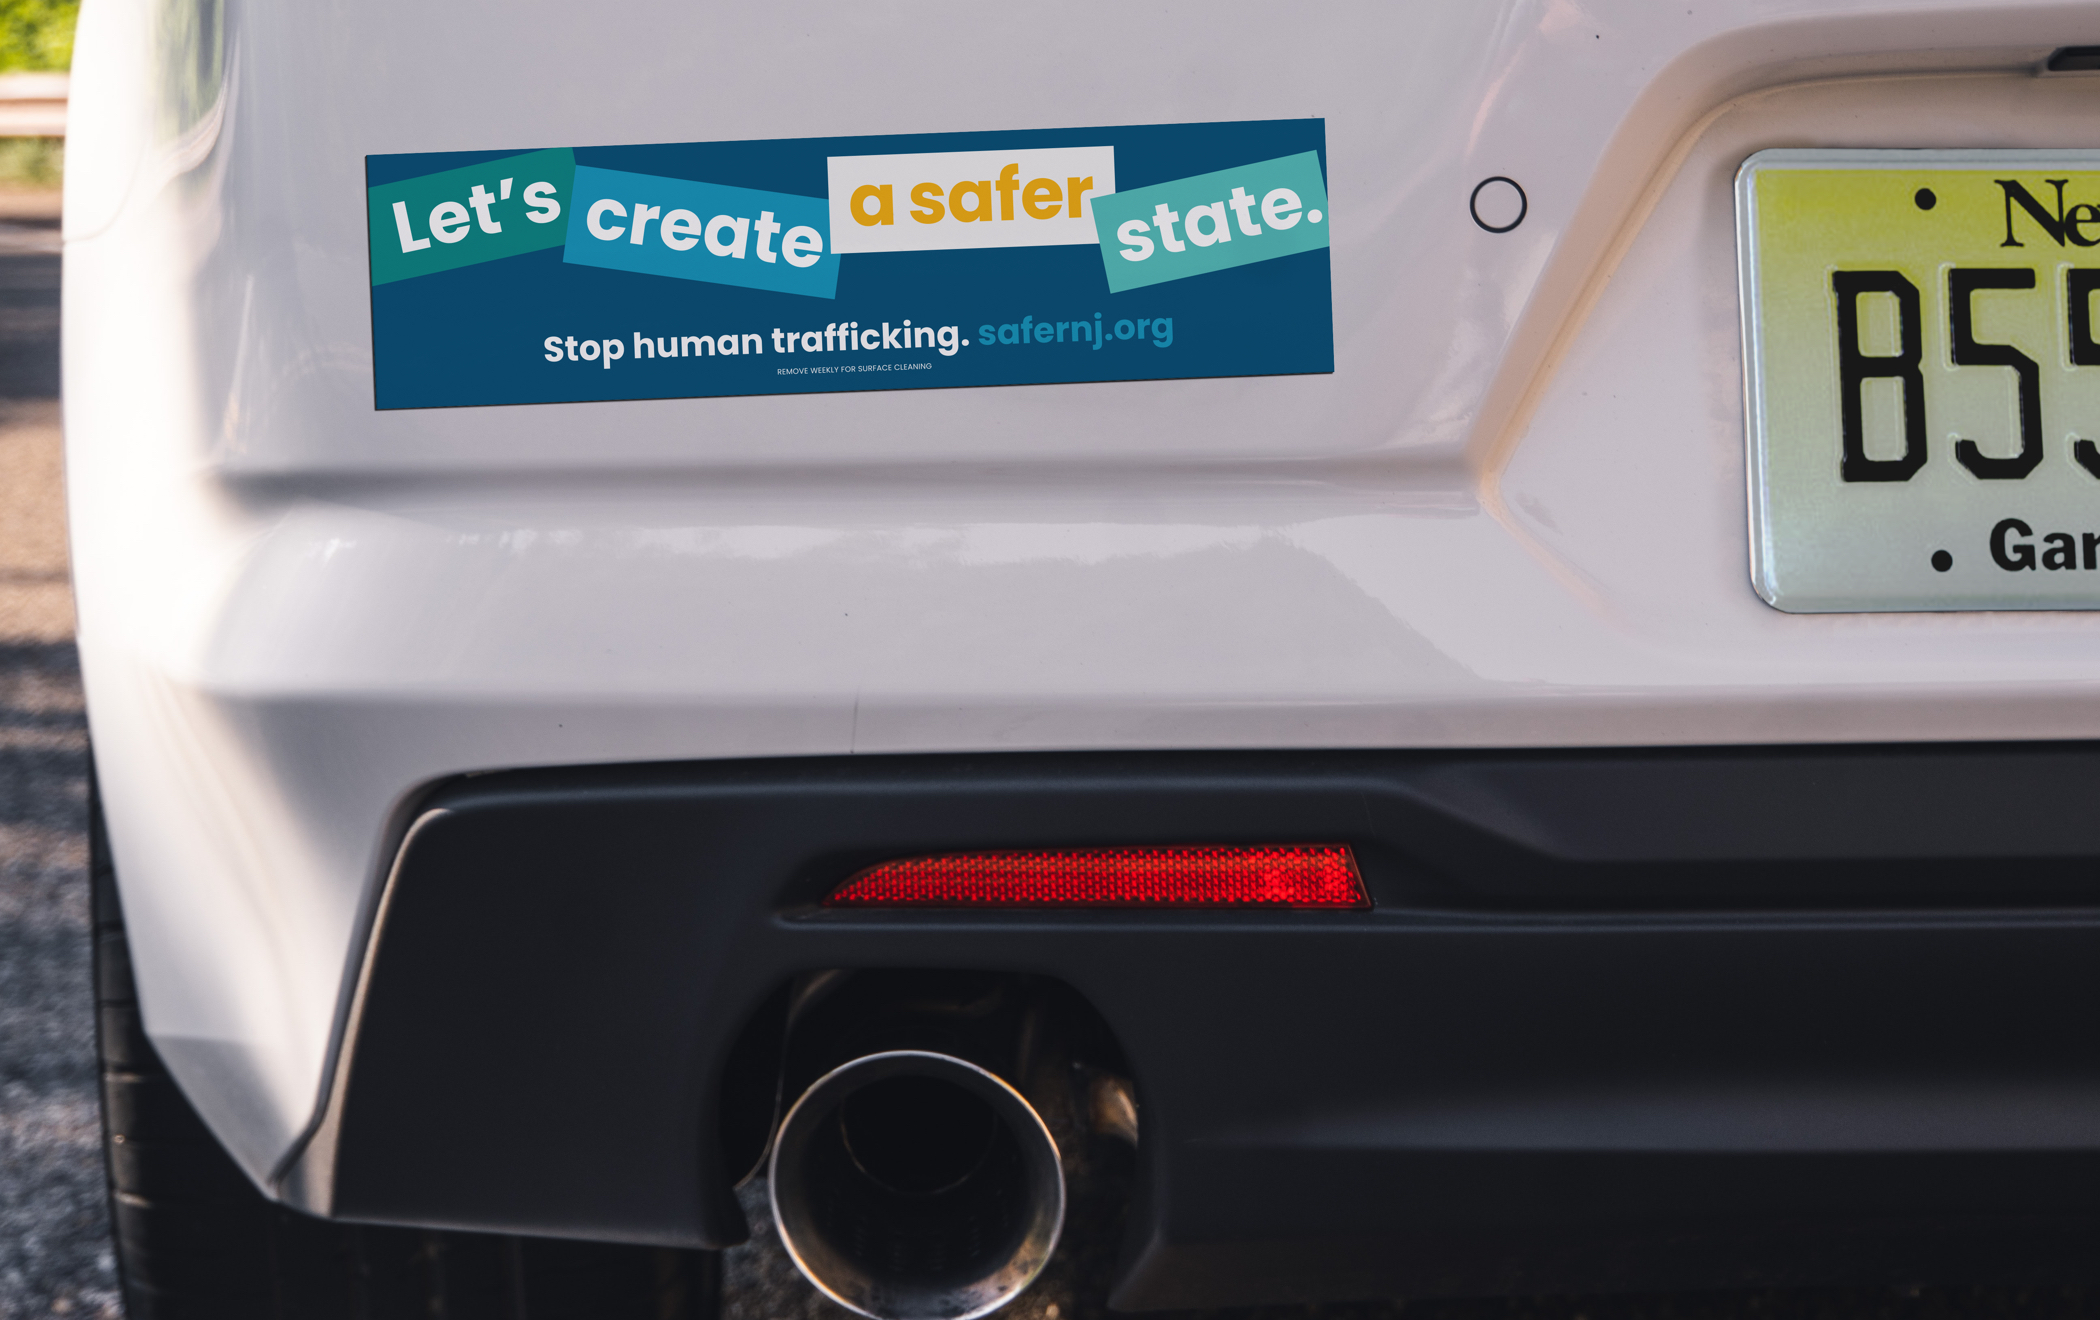 Magnet on car bumper reads “Let’s create a safer state. Stop human trafficking. safernj.org”